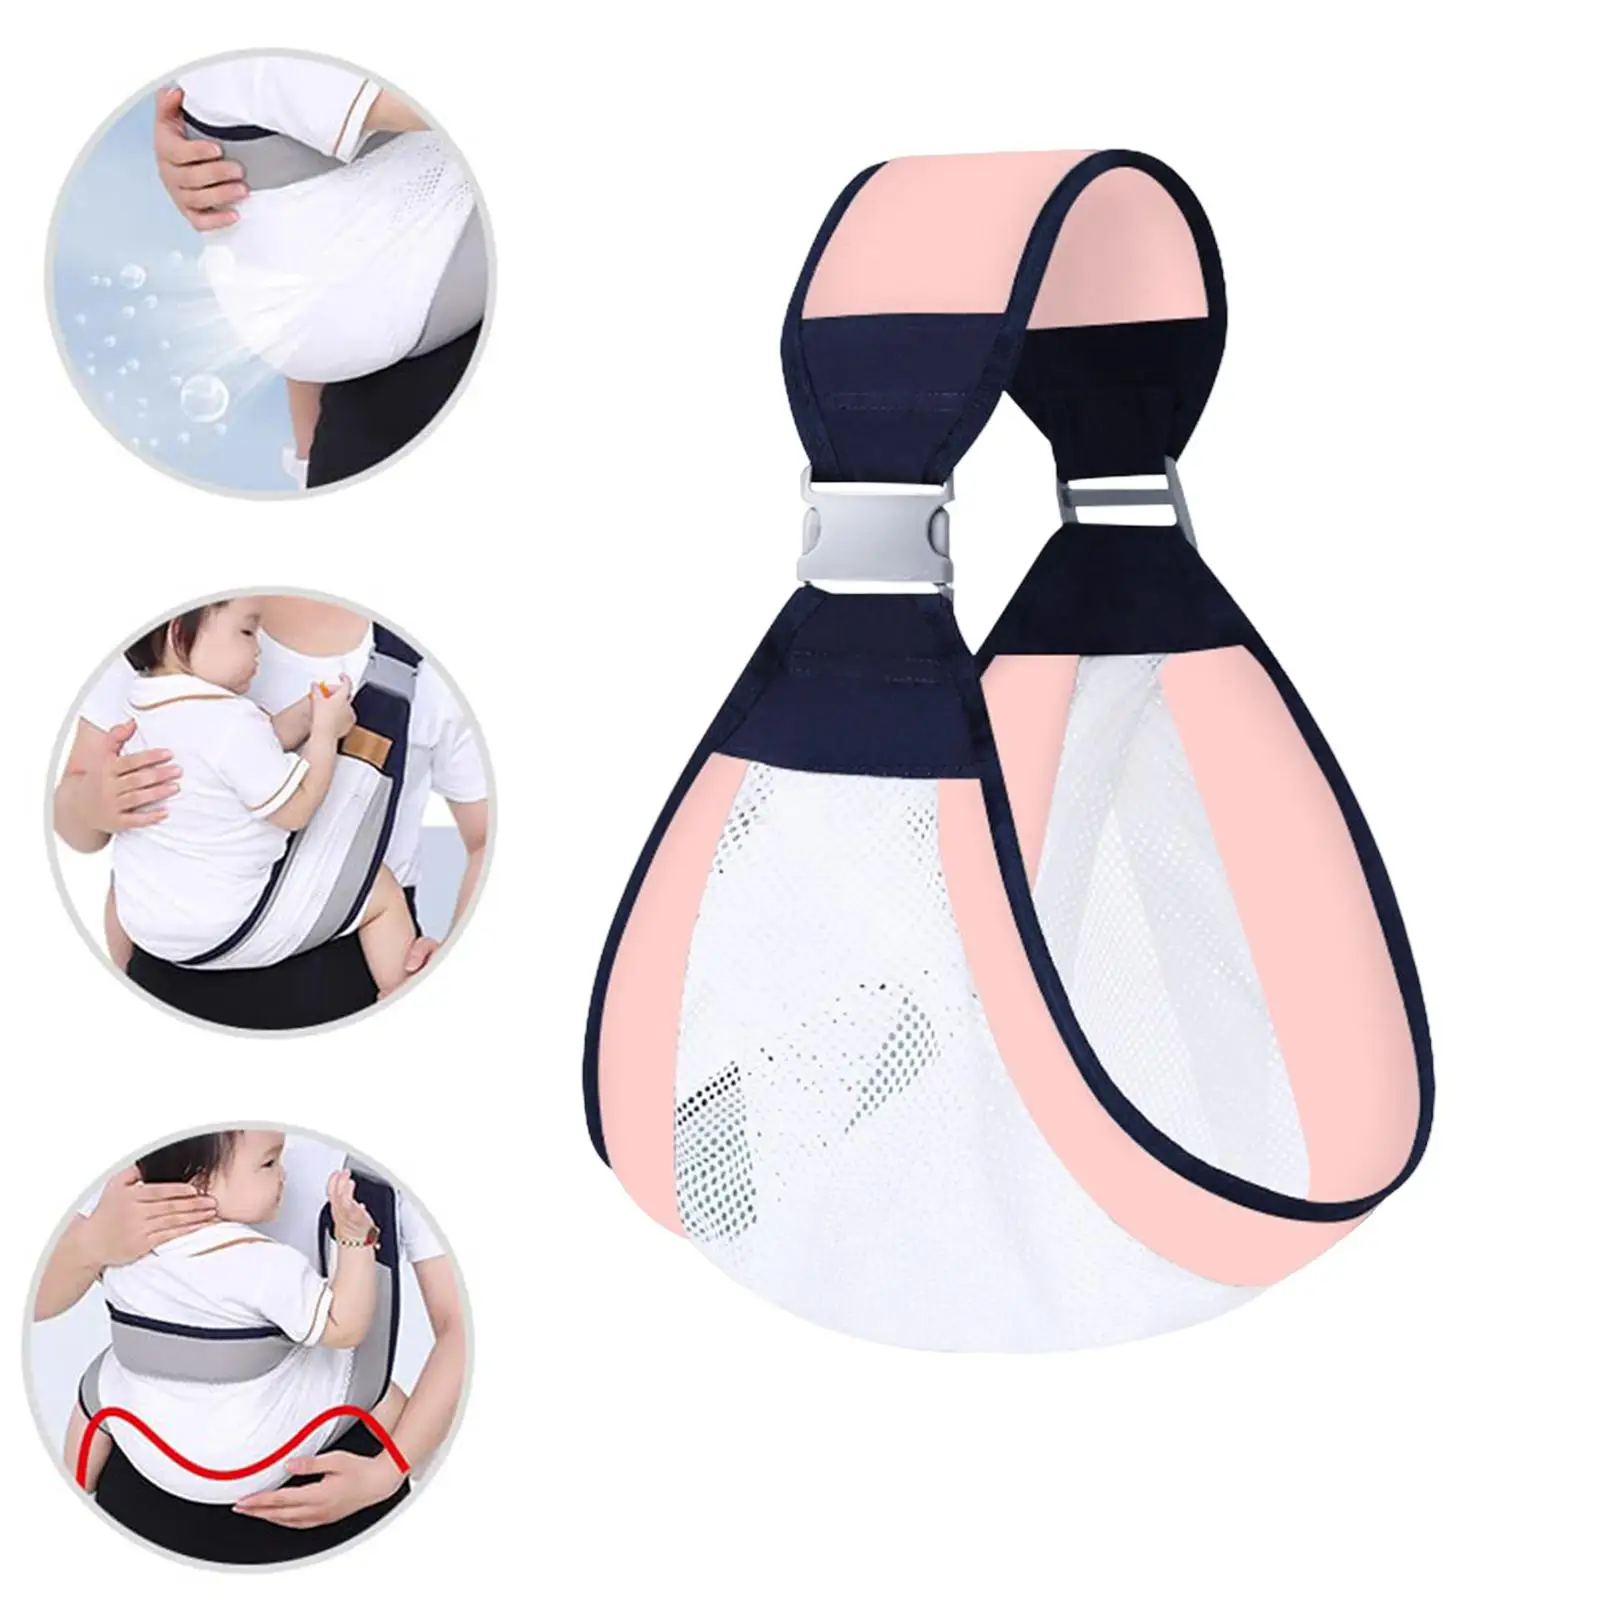 Baby Carrier Sling Breathable Soft Infant Nursing Cover Carrier with Clip